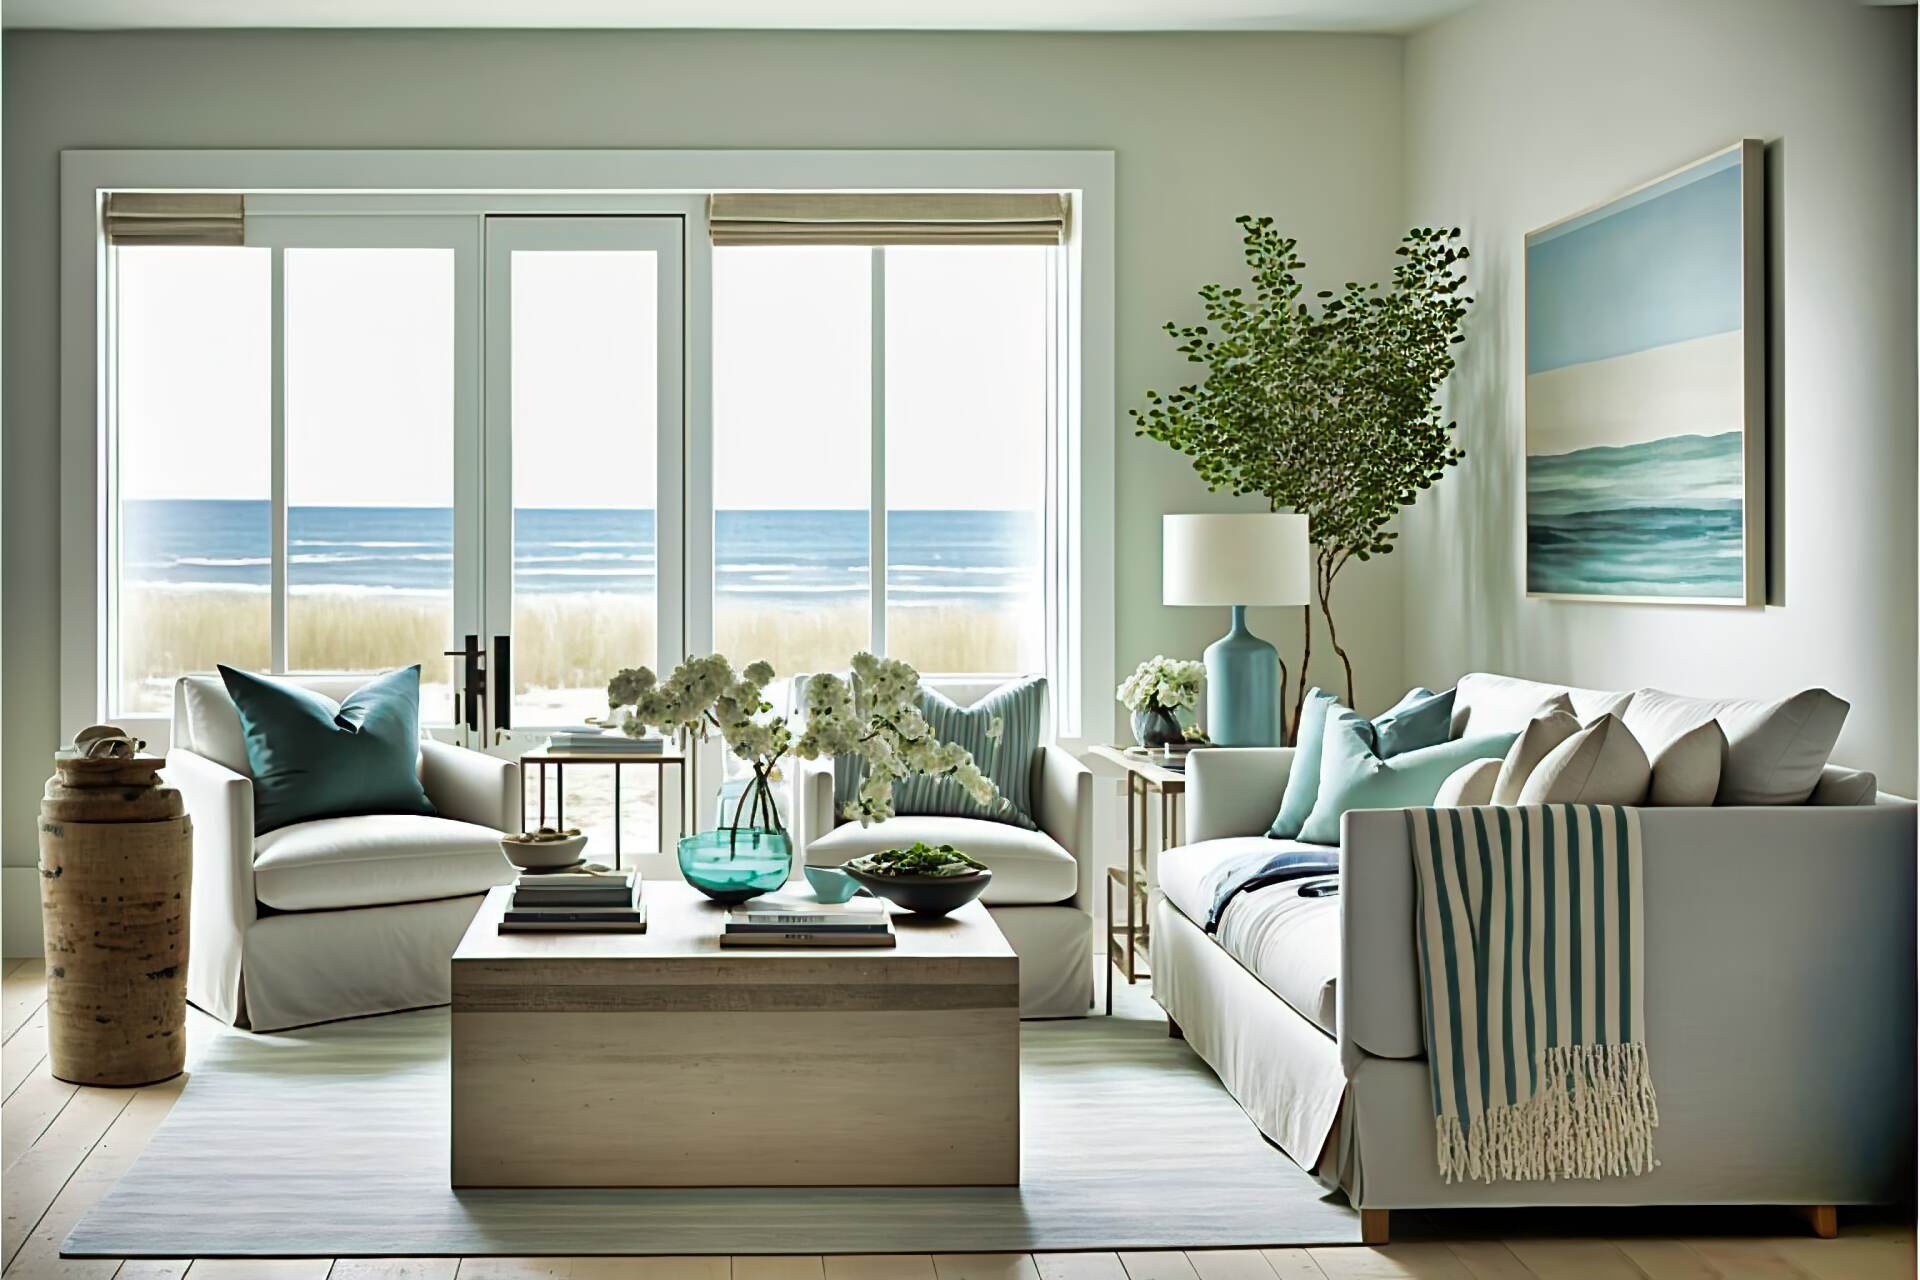 This Modern Relaxed Living Room Features A Beachy Color Scheme. A Comfortable White Armchair And A Matching Sofa Provide The Perfect Place To Relax, While A Light Wooden Coffee Table And A Striped Rug Complete The Look. A Few Interesting Art Pieces And A Large Window With A View Of The Ocean Complete The Beachy Vibe.